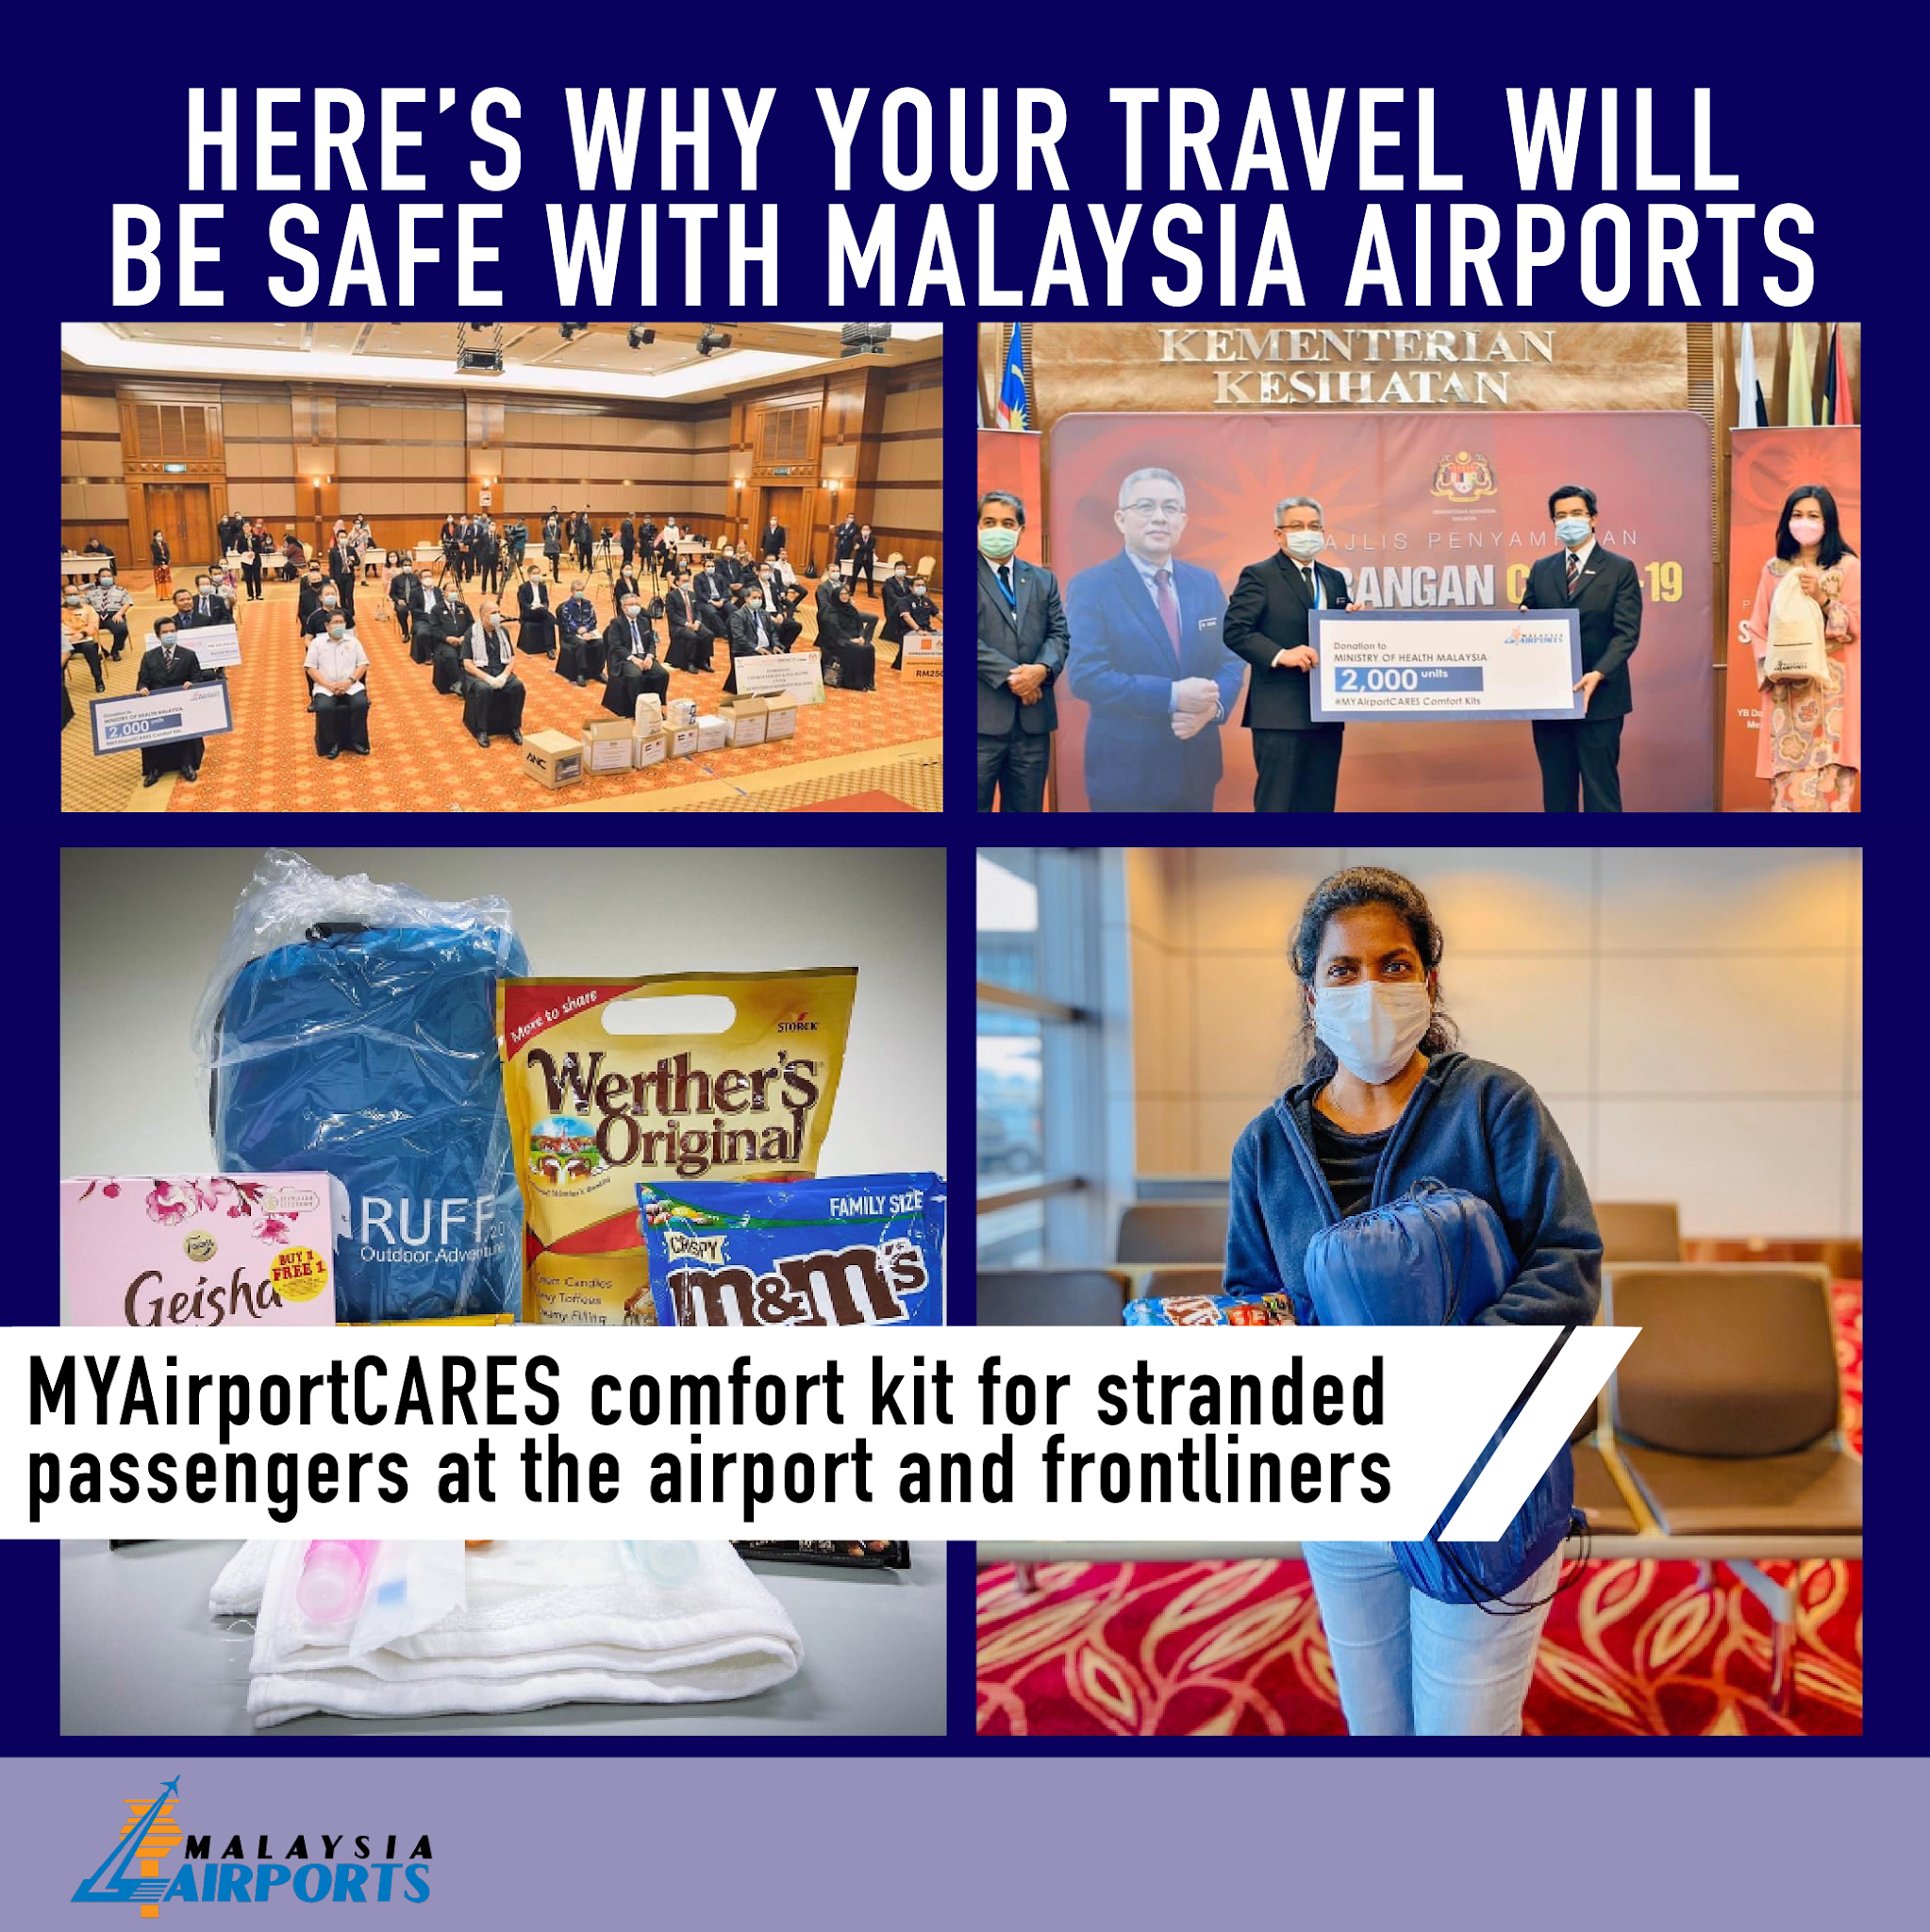 safe journey meaning in malaysia